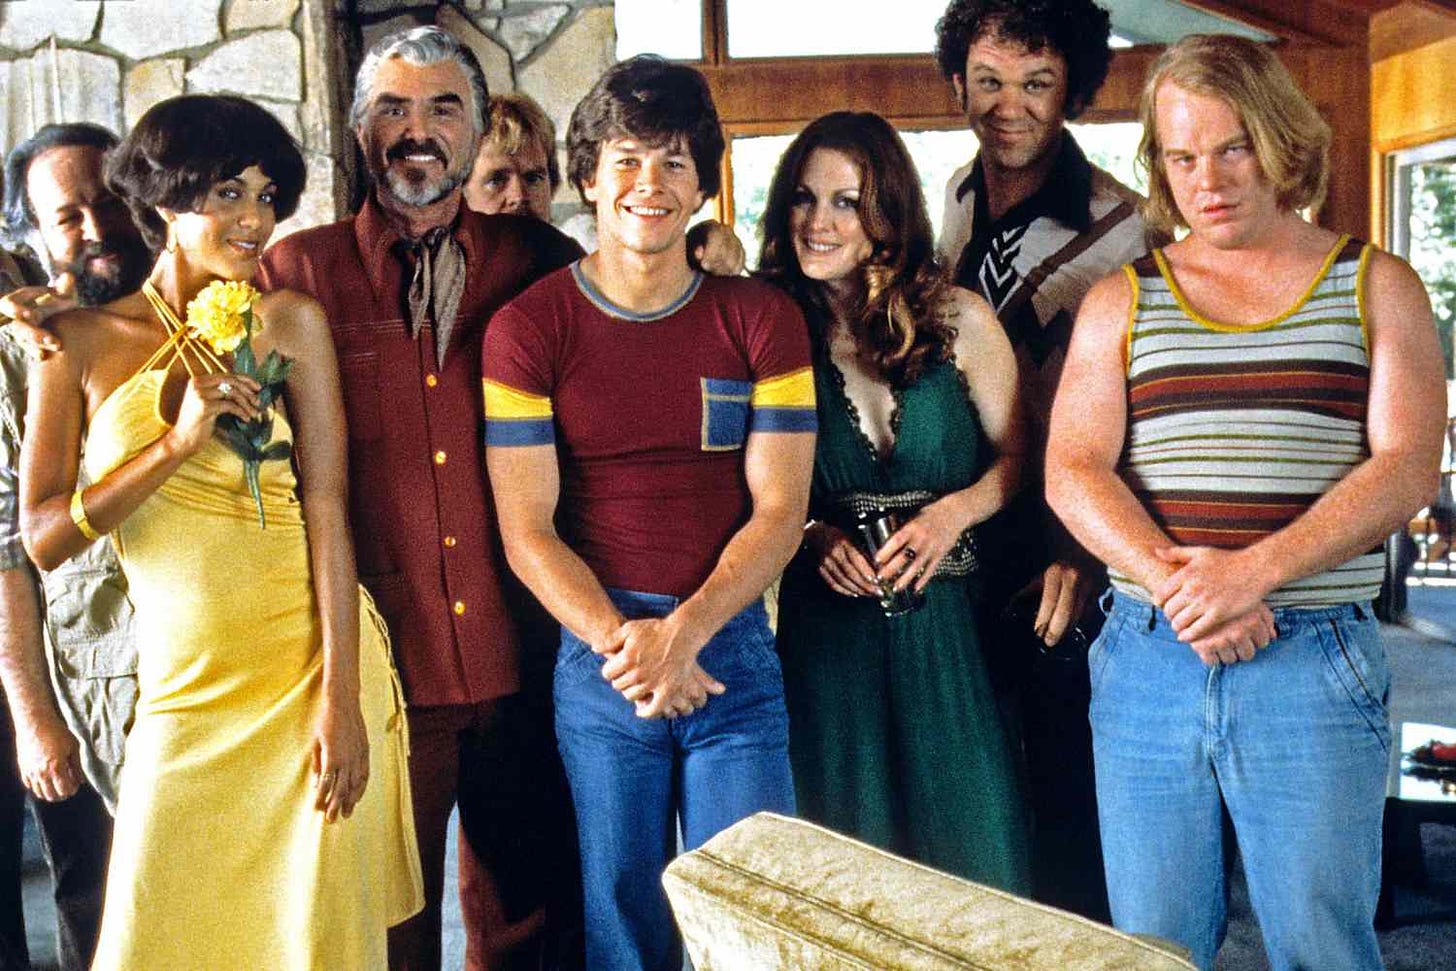 Boogie Nights' cast: Where are they now?